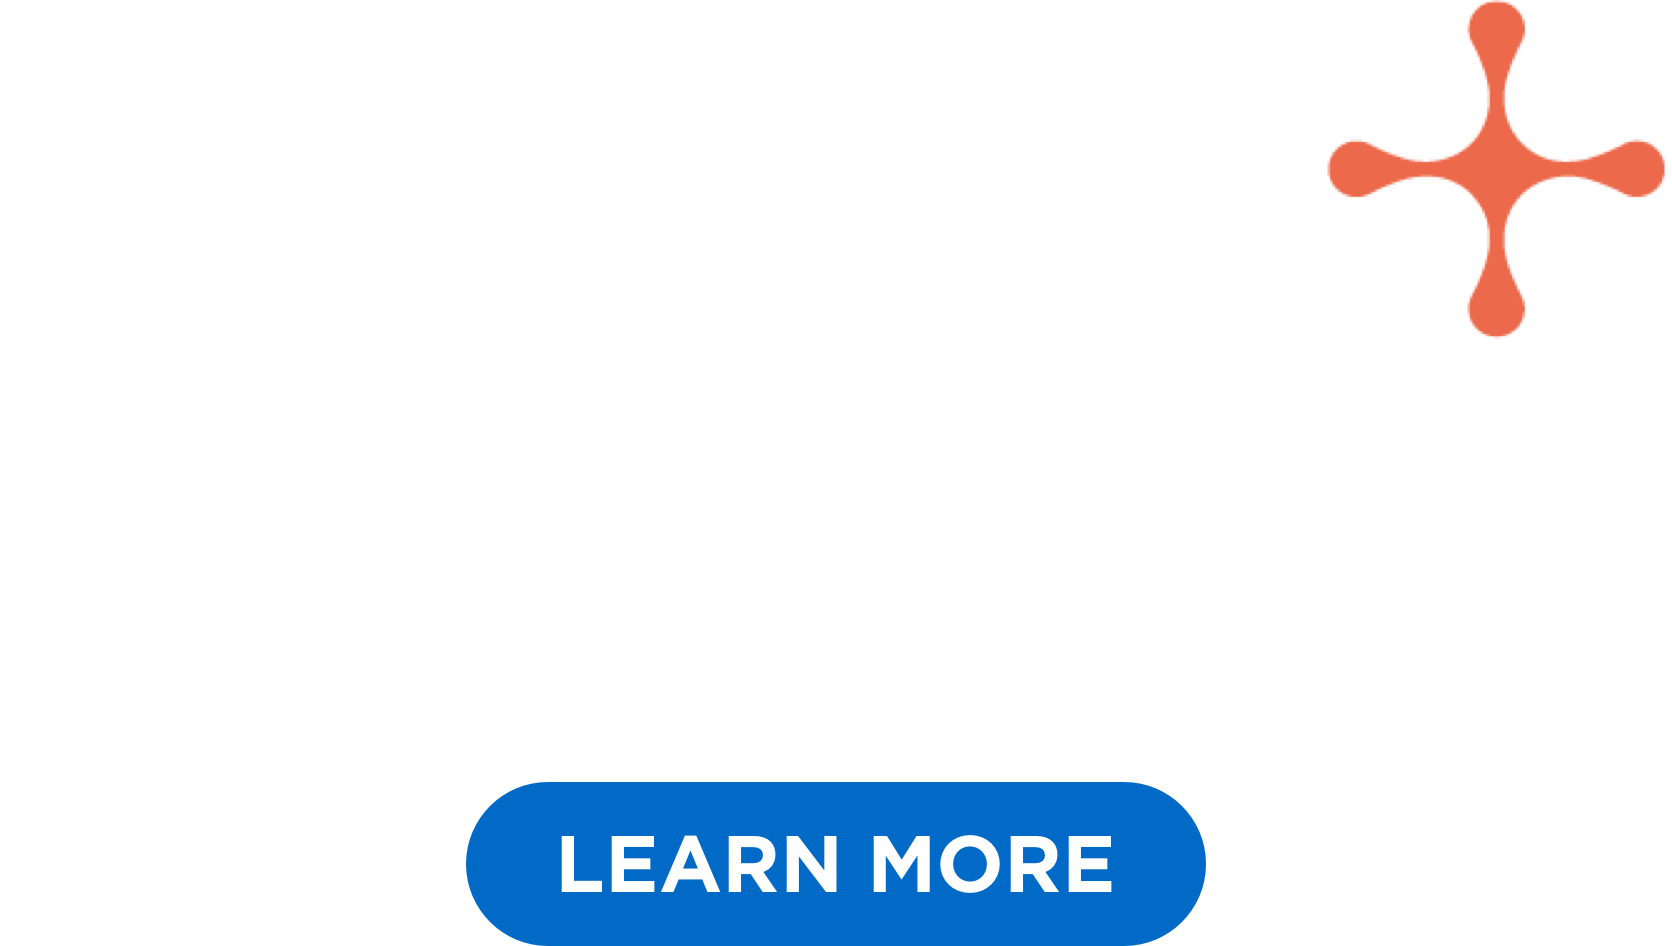 Carousel, "PLUS by Ortho Dermatologics" with "LEARN MORE" button